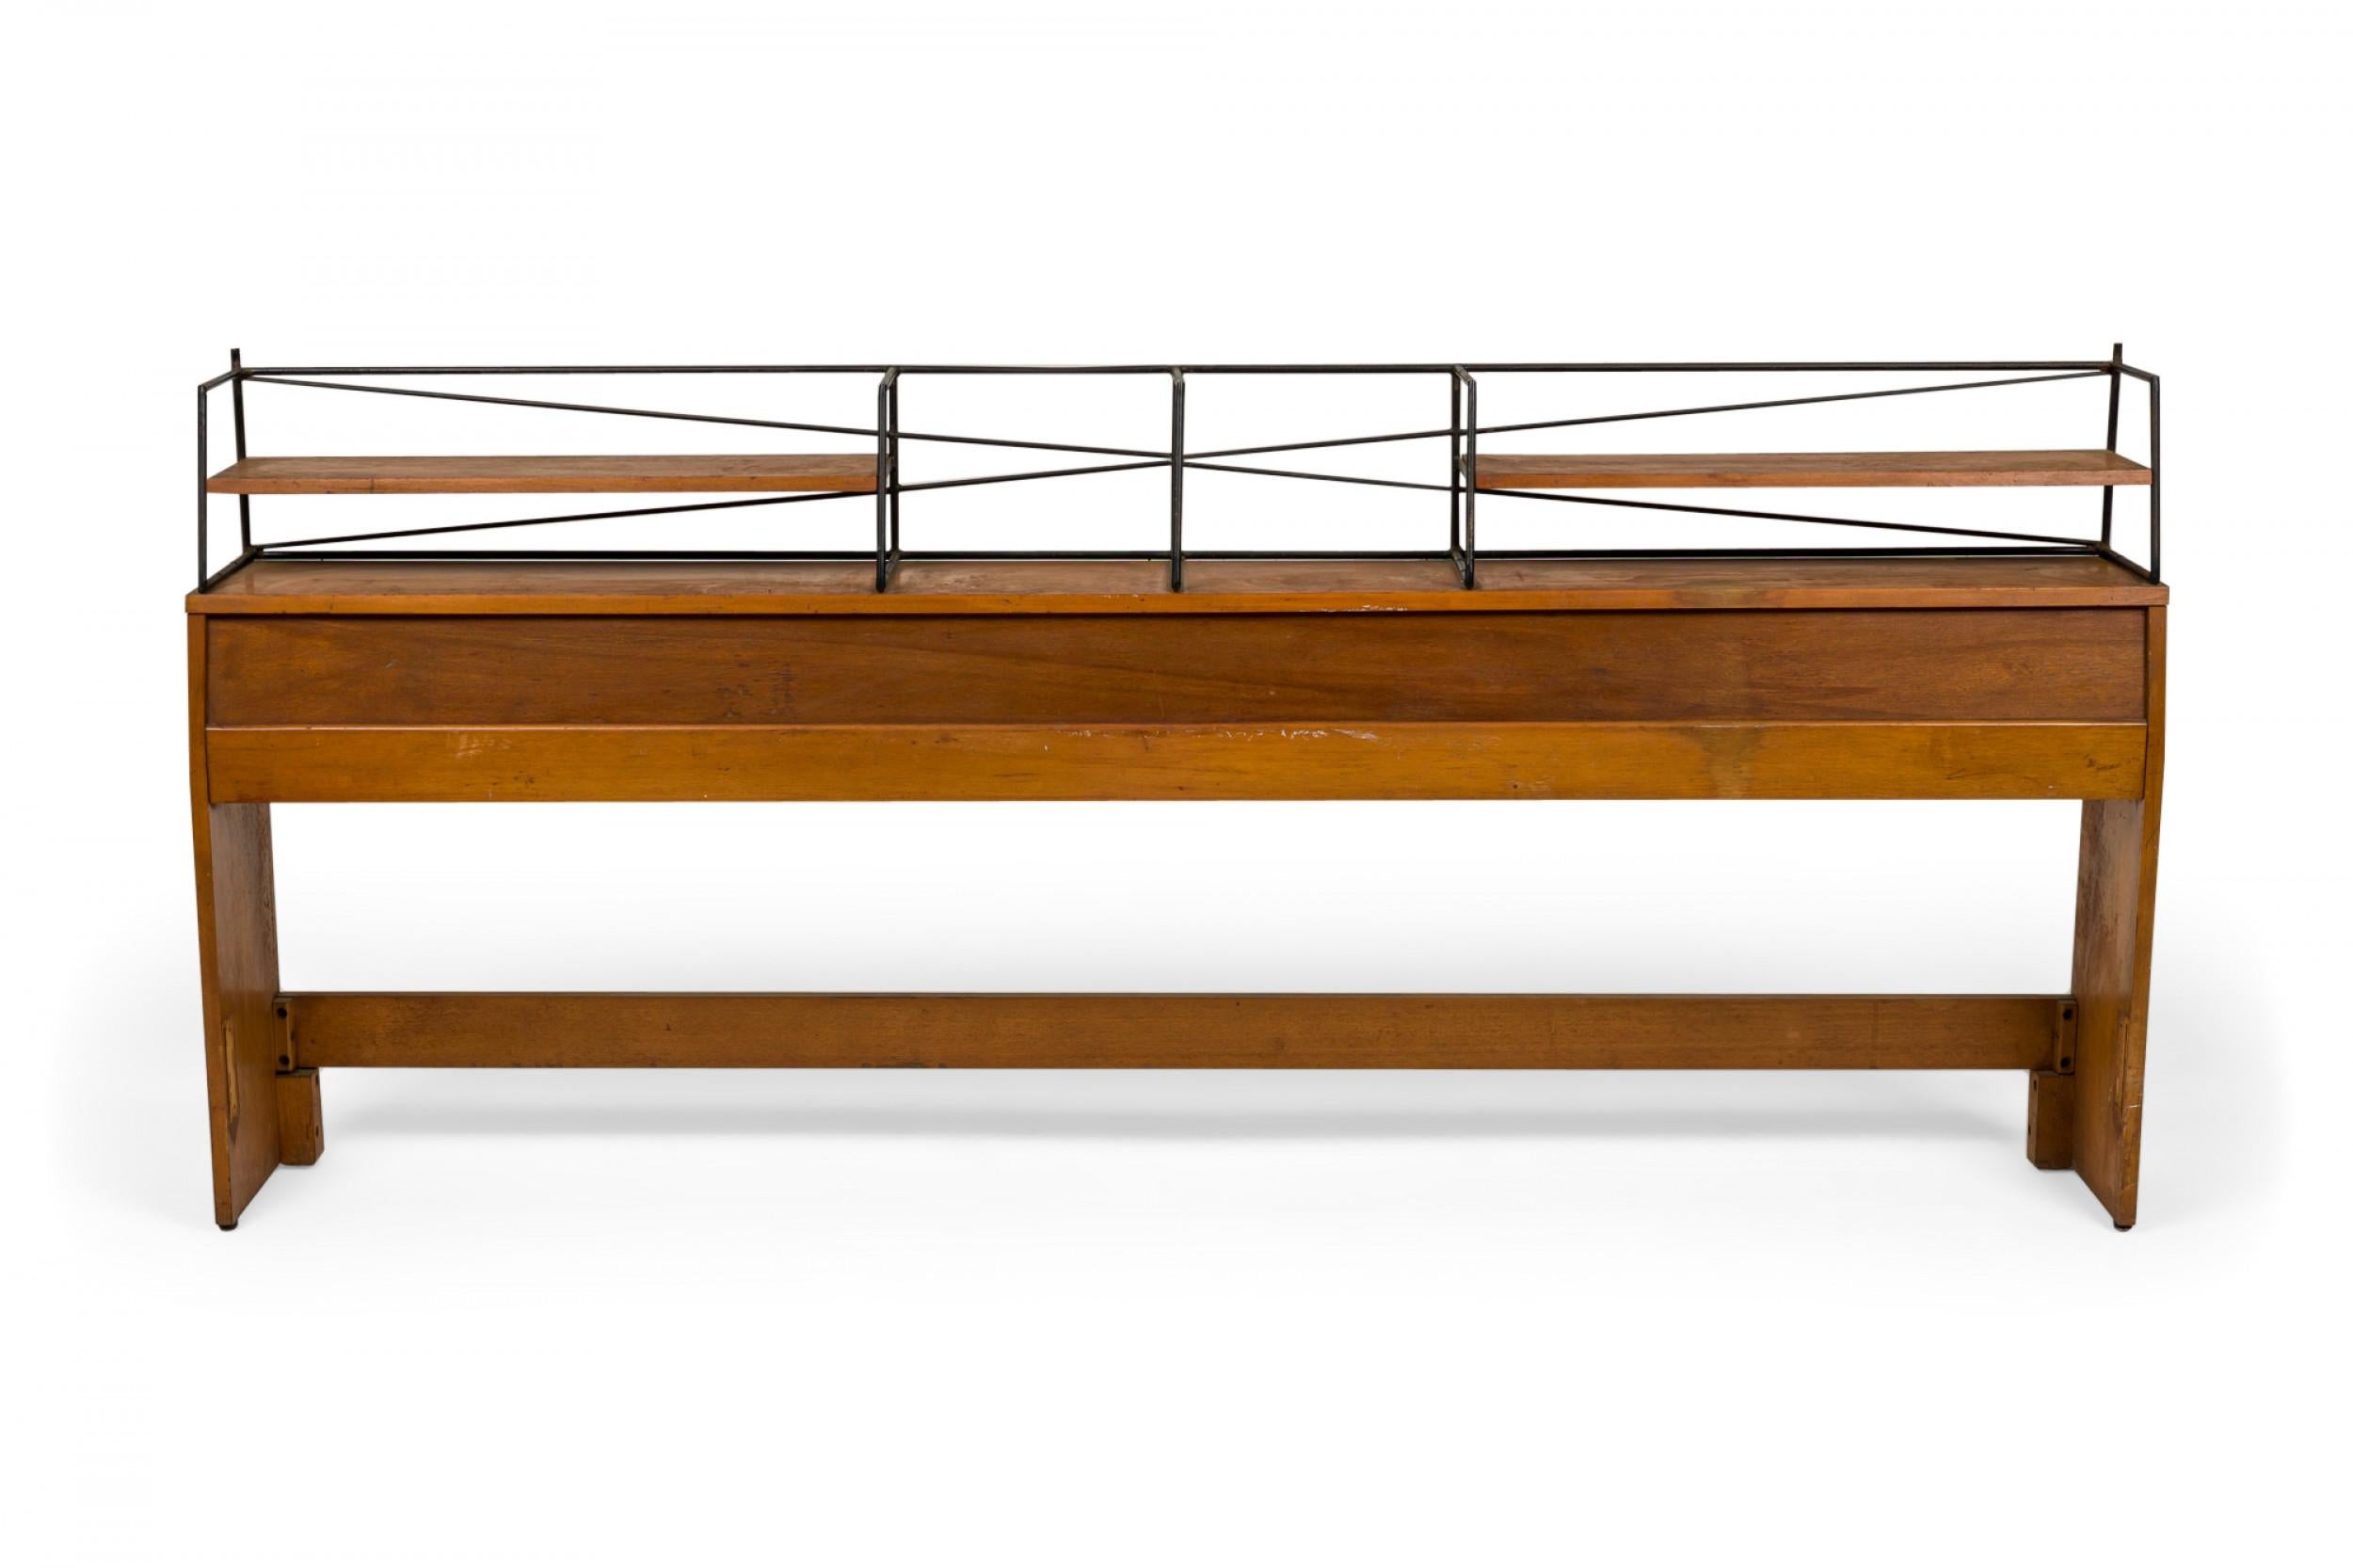 American Mid-Century king-size Planner Group design walnut headboard with an upper shelf section with an iron structure. (PAUL MCCOBB FOR WINCHENDON FURNITURE CO)